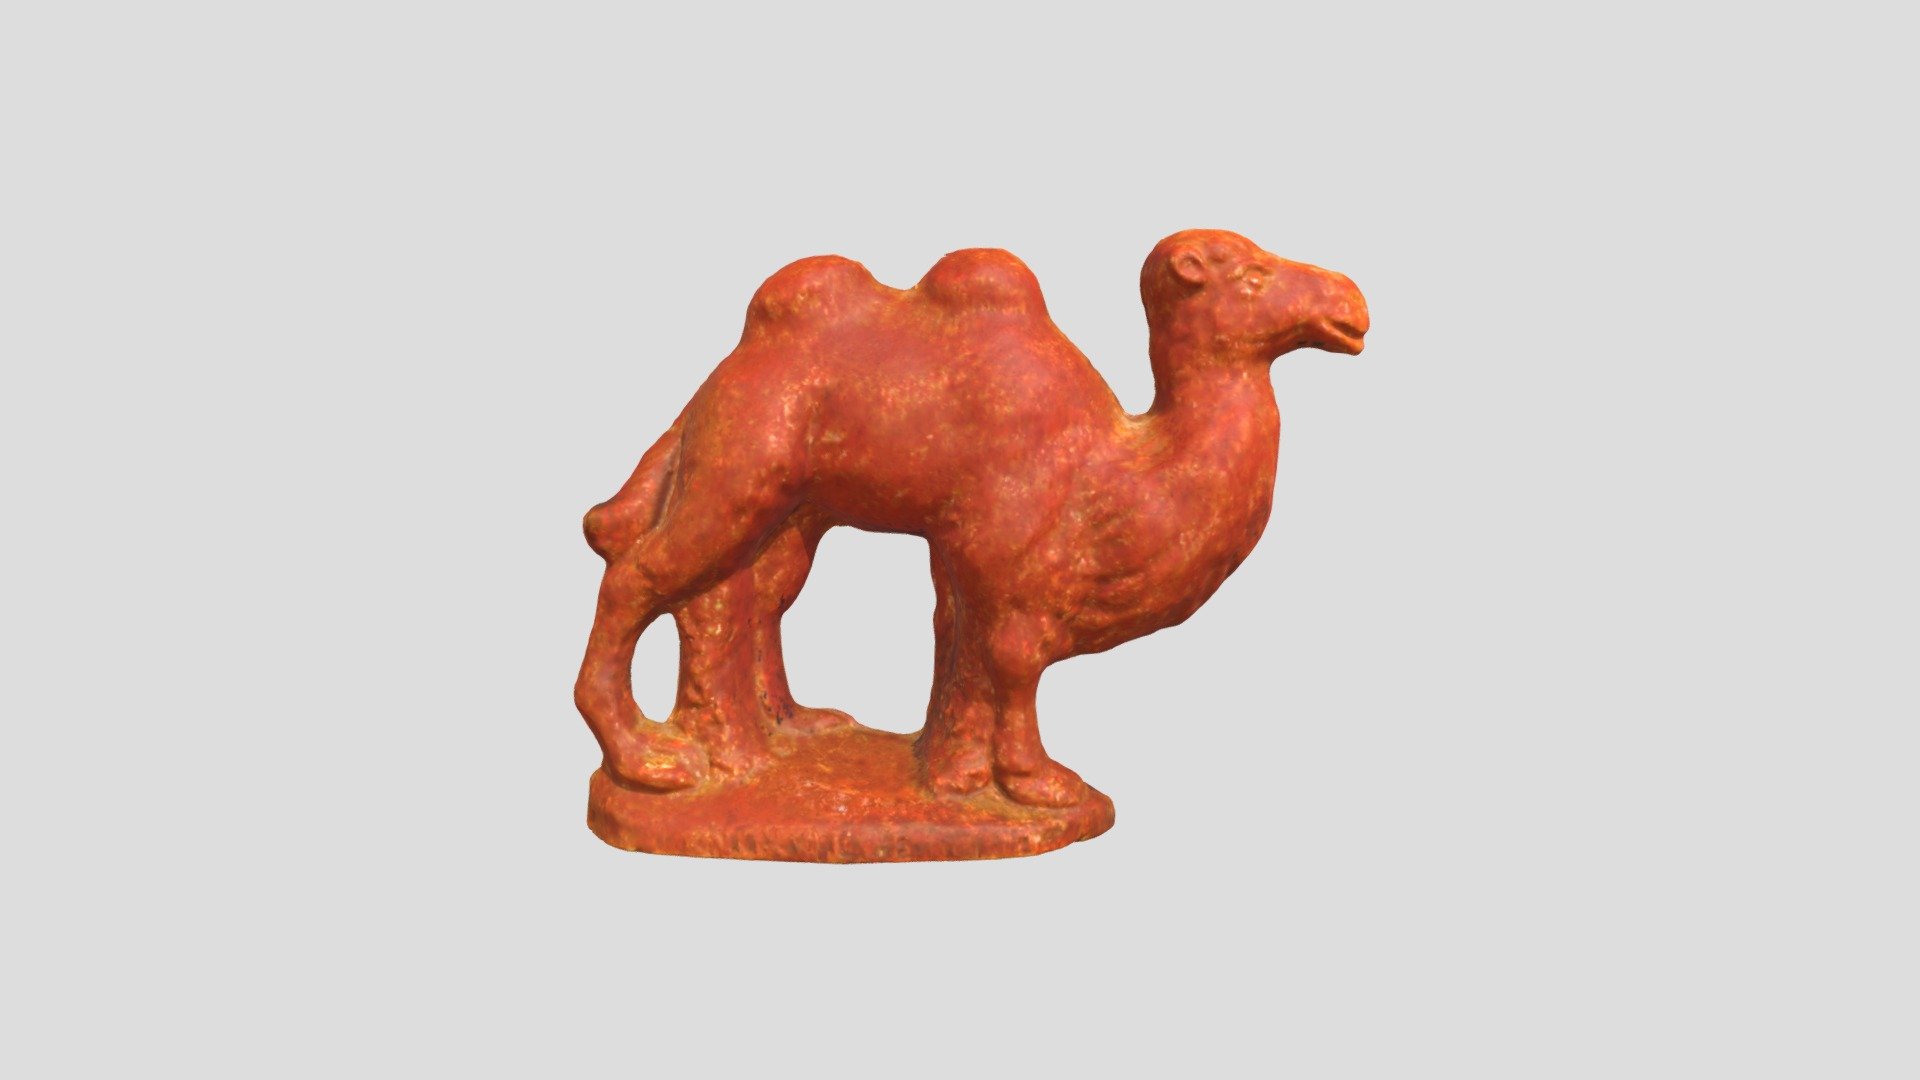 This object is a Mold-A-Rama Camel figurine from the Knoxville Zoo. Courtesy of Chase Westfall of VCU's Anderson Gallery 3d model